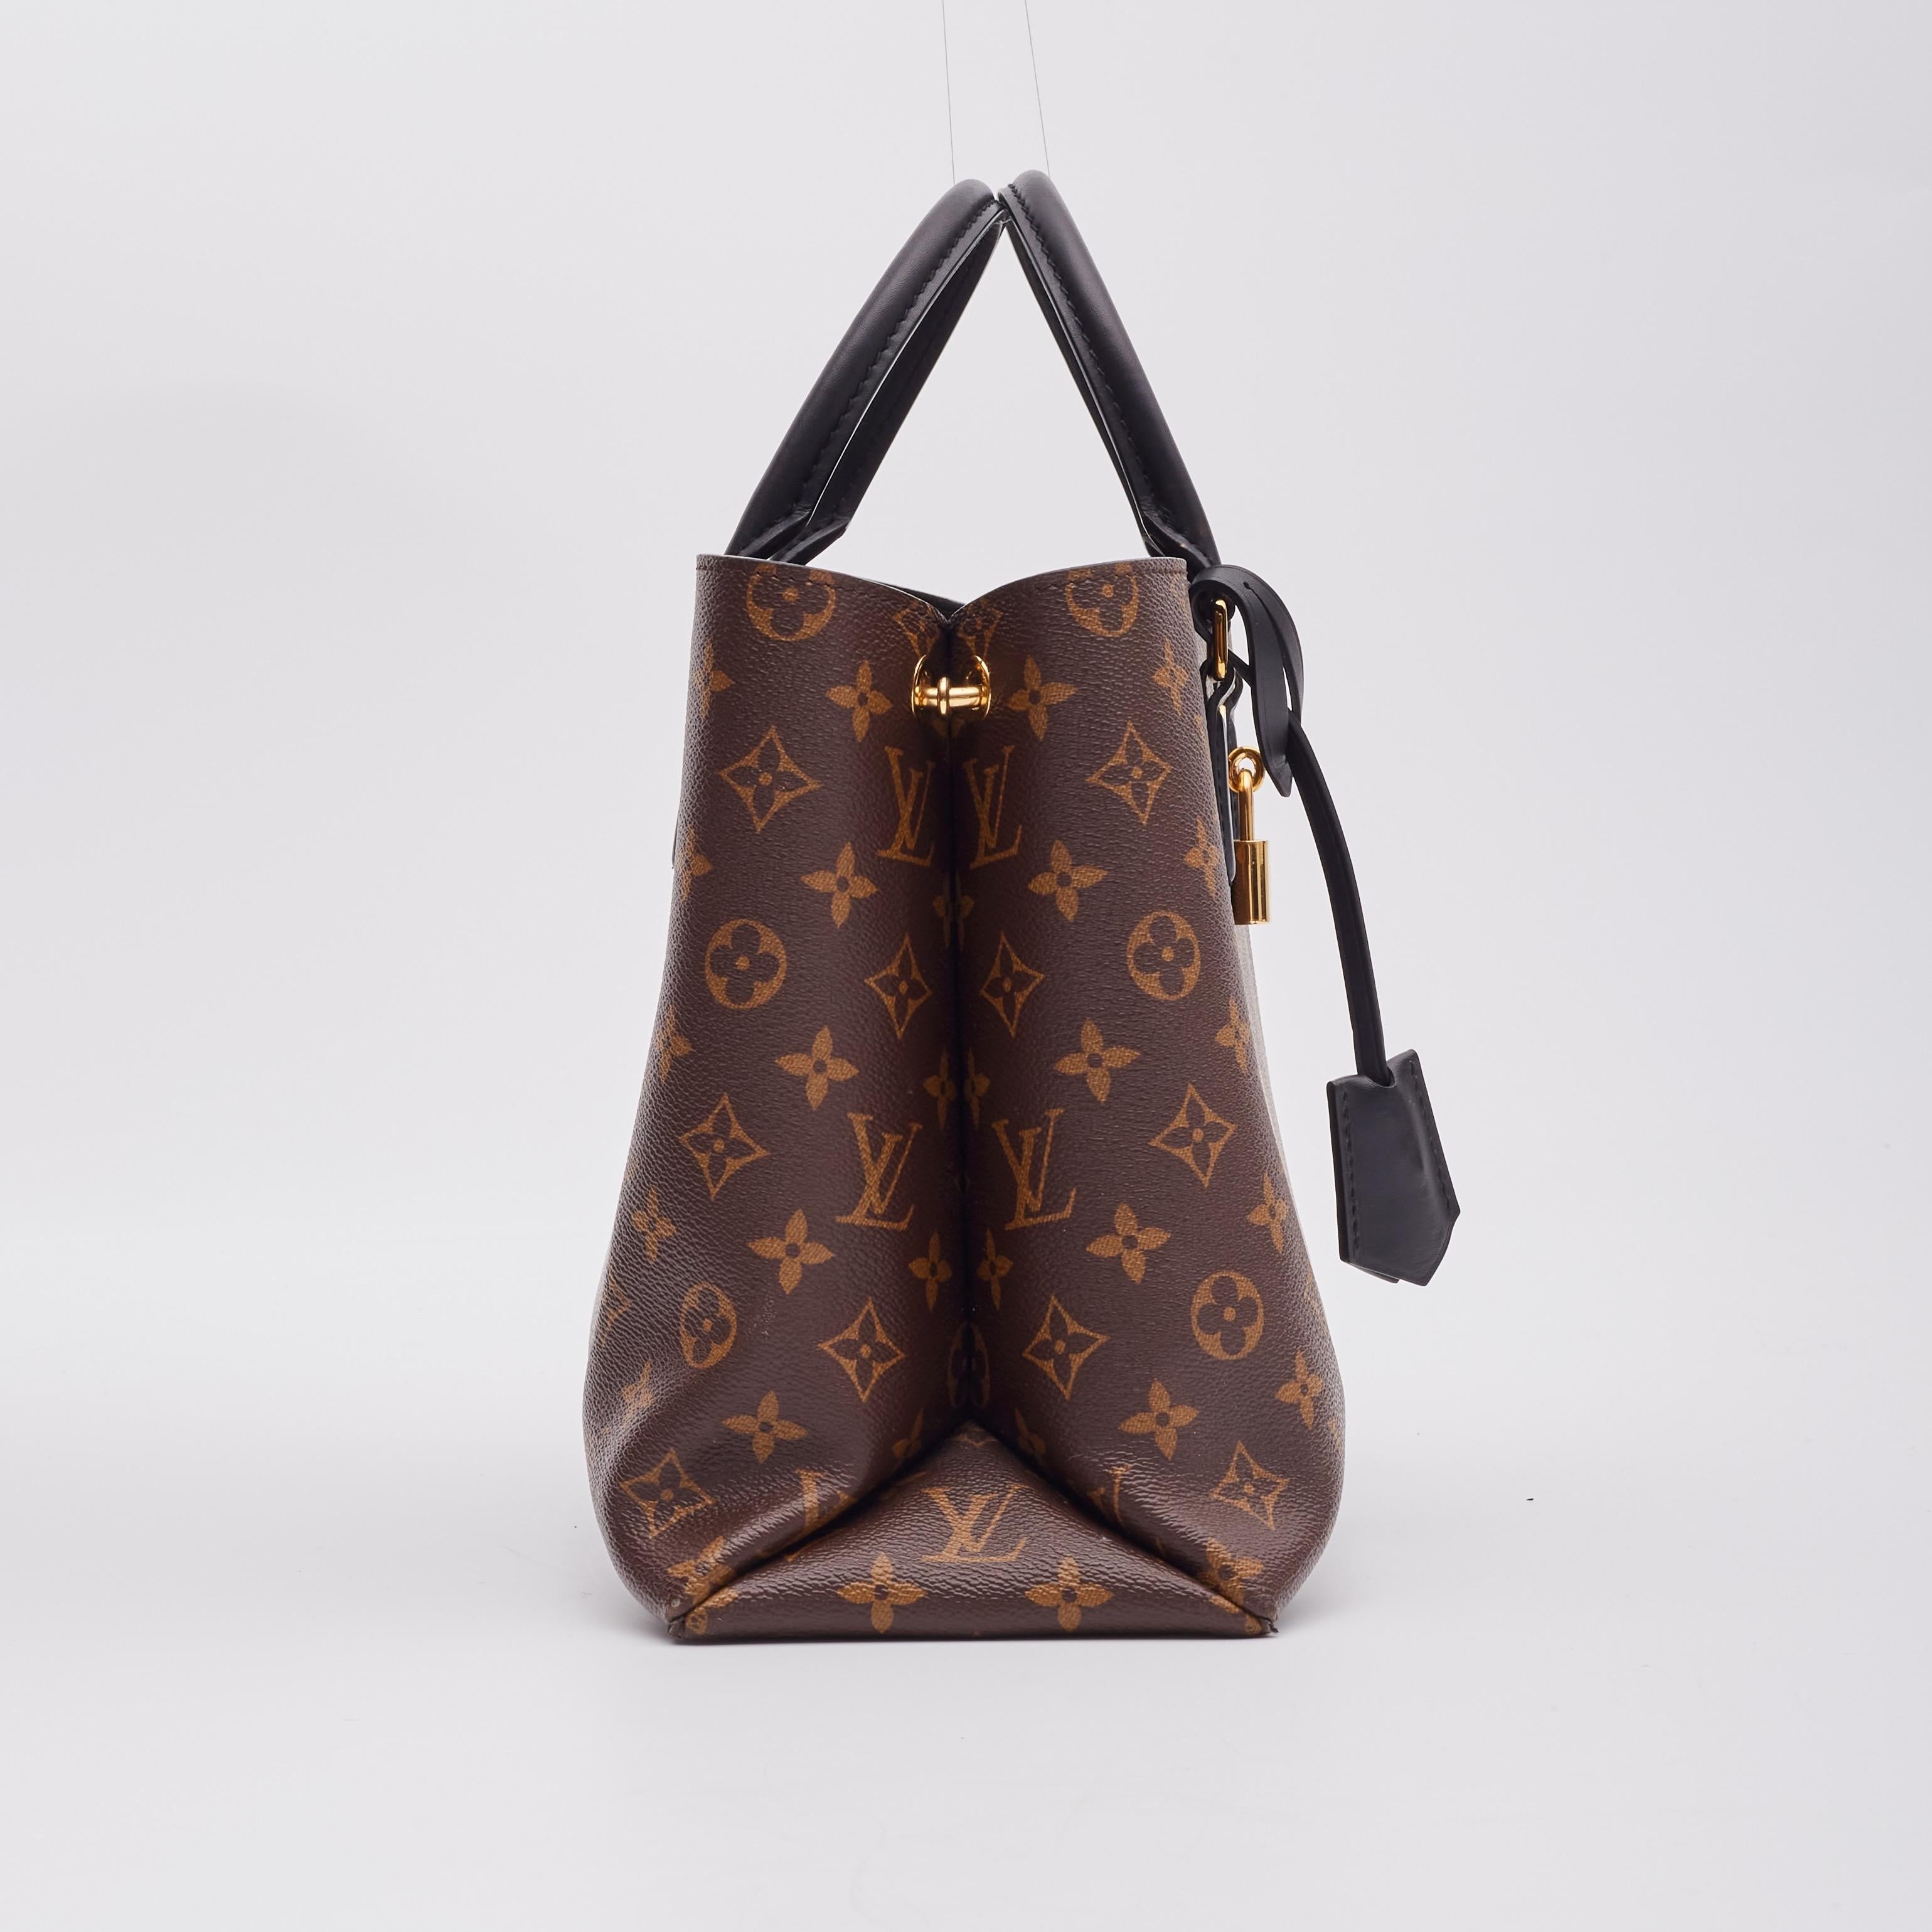 Louis Vuitton Monogram Flower Tote Black Leather Finishes 2